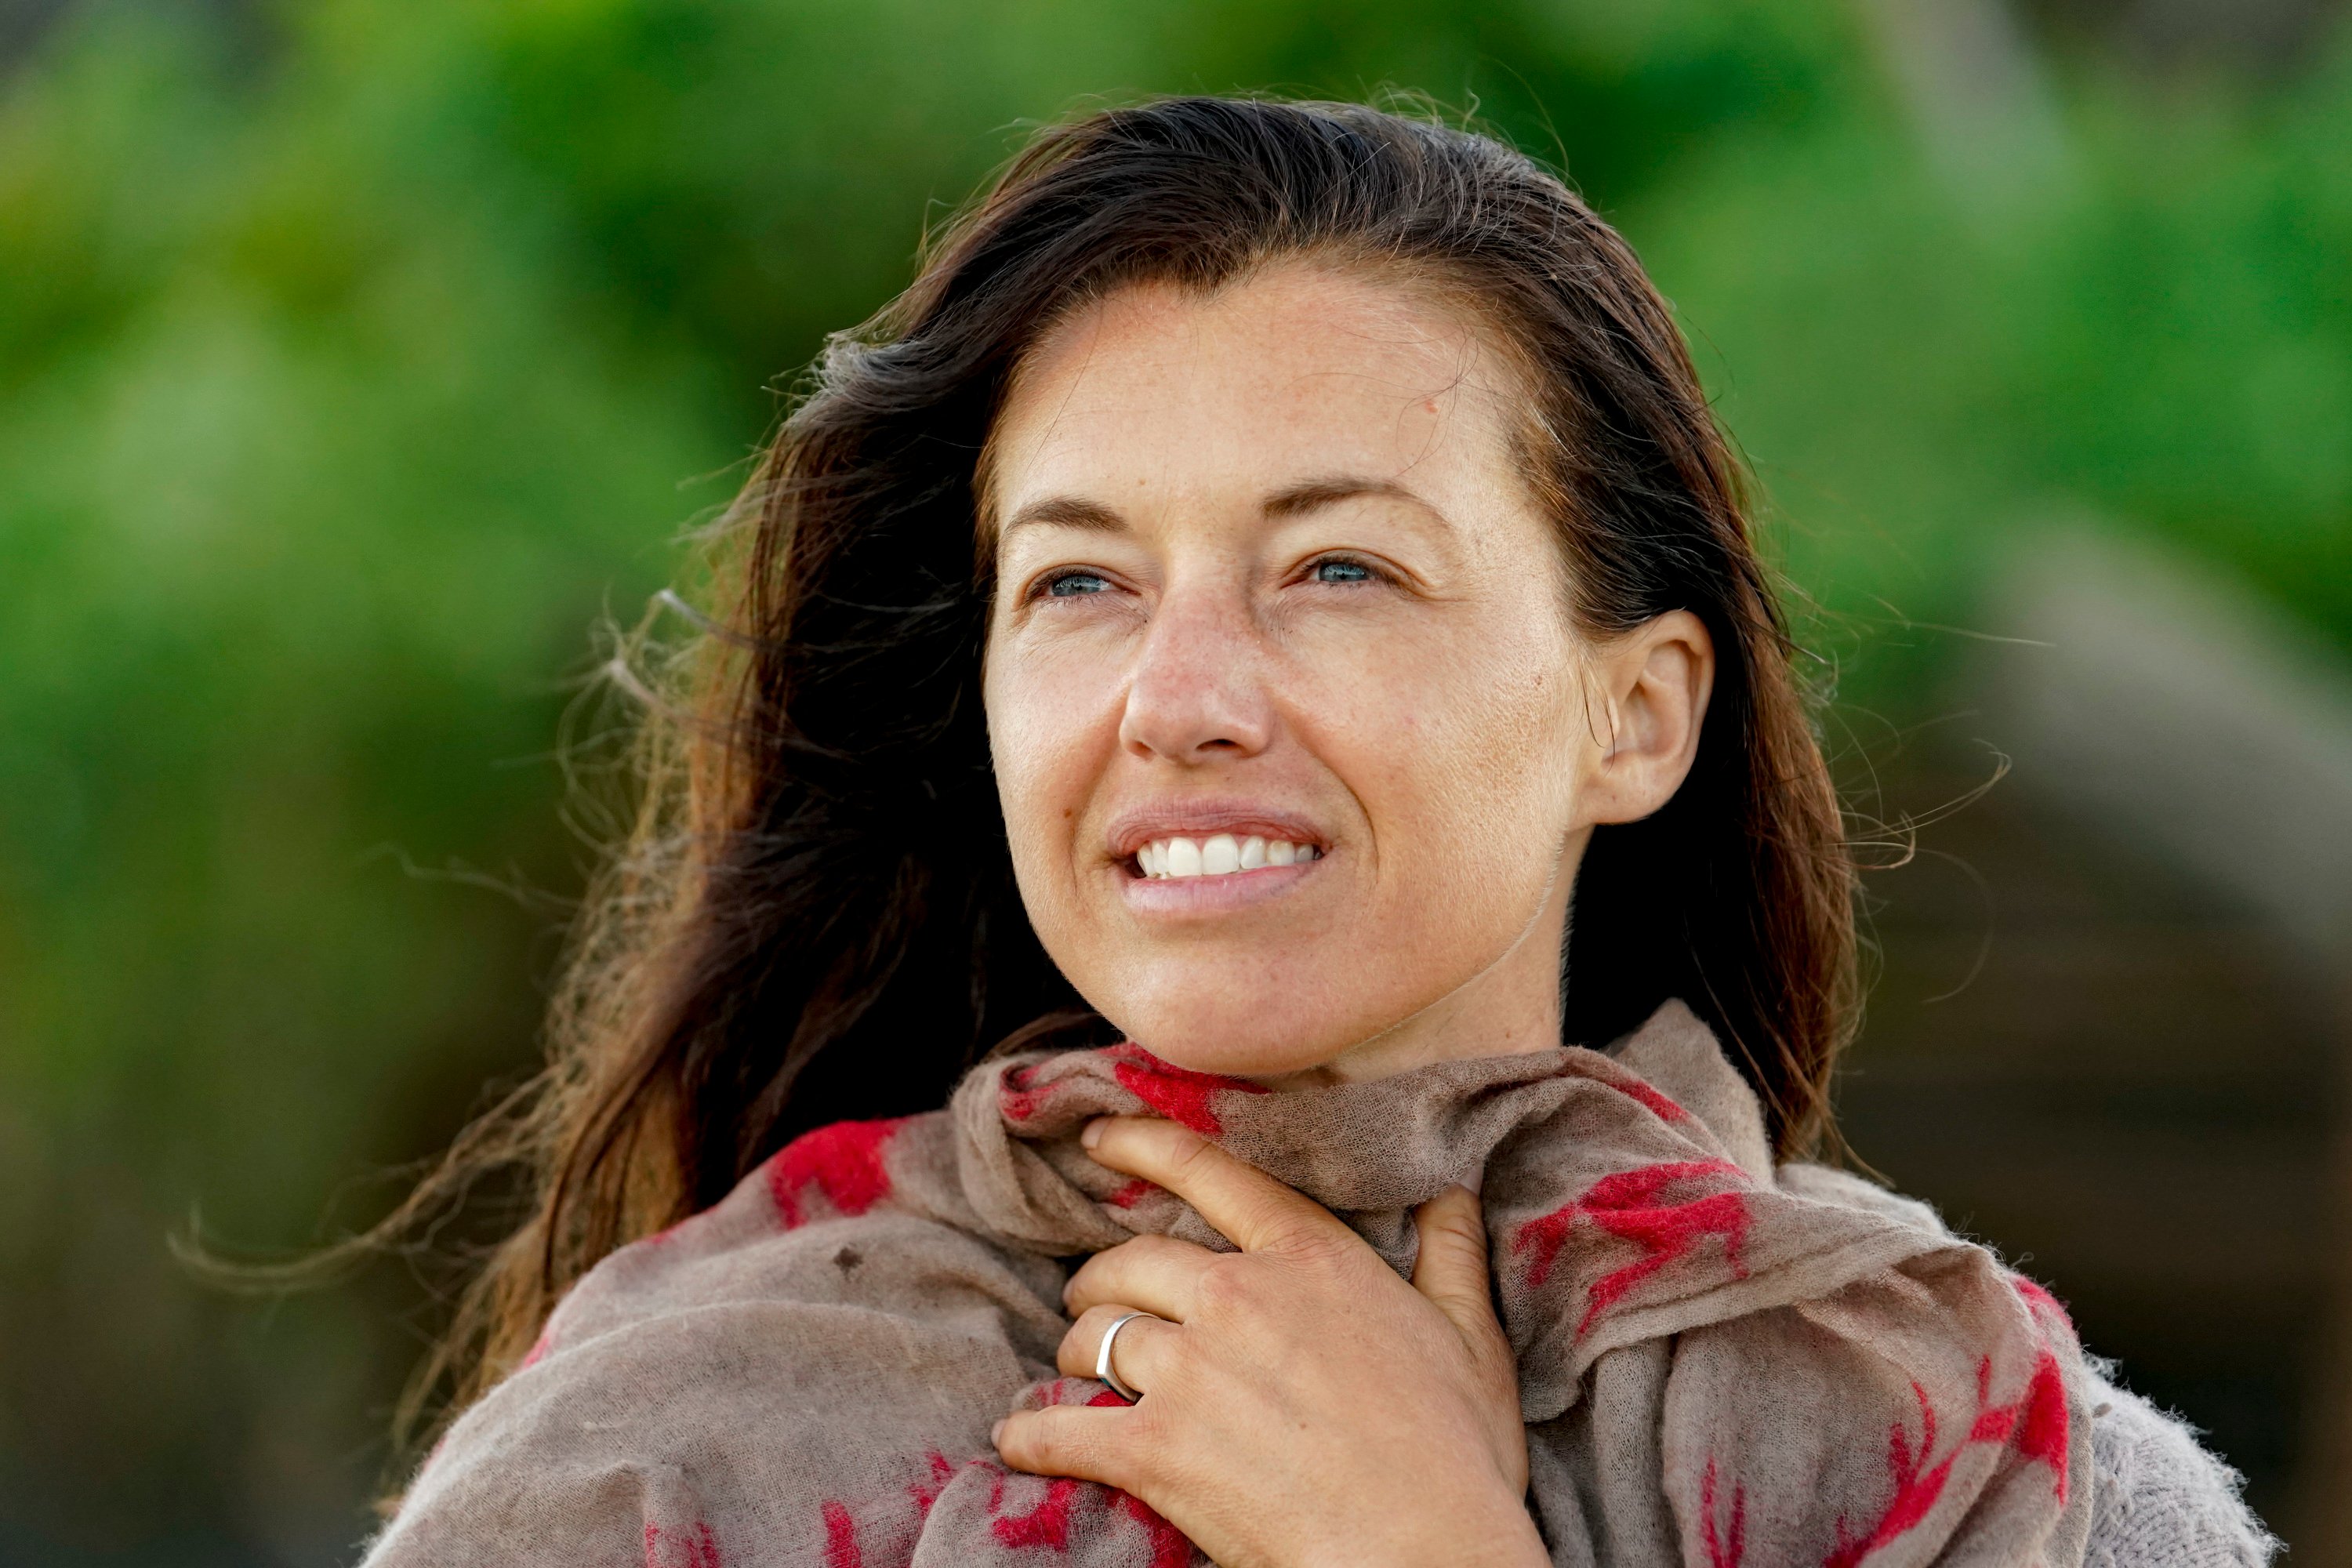 'Survivor' star Parvati Shallow clutches a tan and red scarf to her neck.